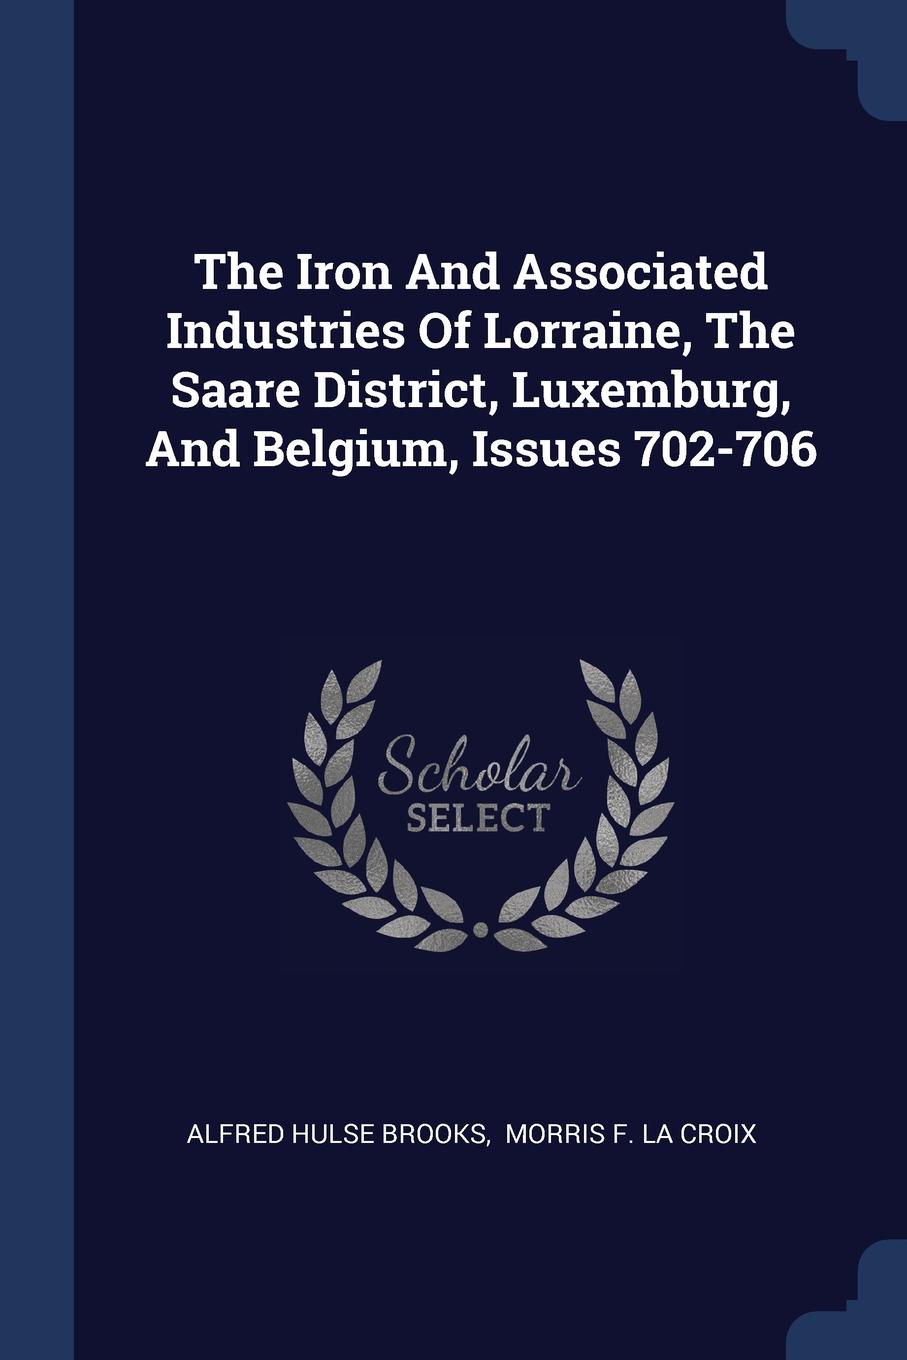 The Iron And Associated Industries Of Lorraine, The Saare District, Luxemburg, And Belgium, Issues 702-706